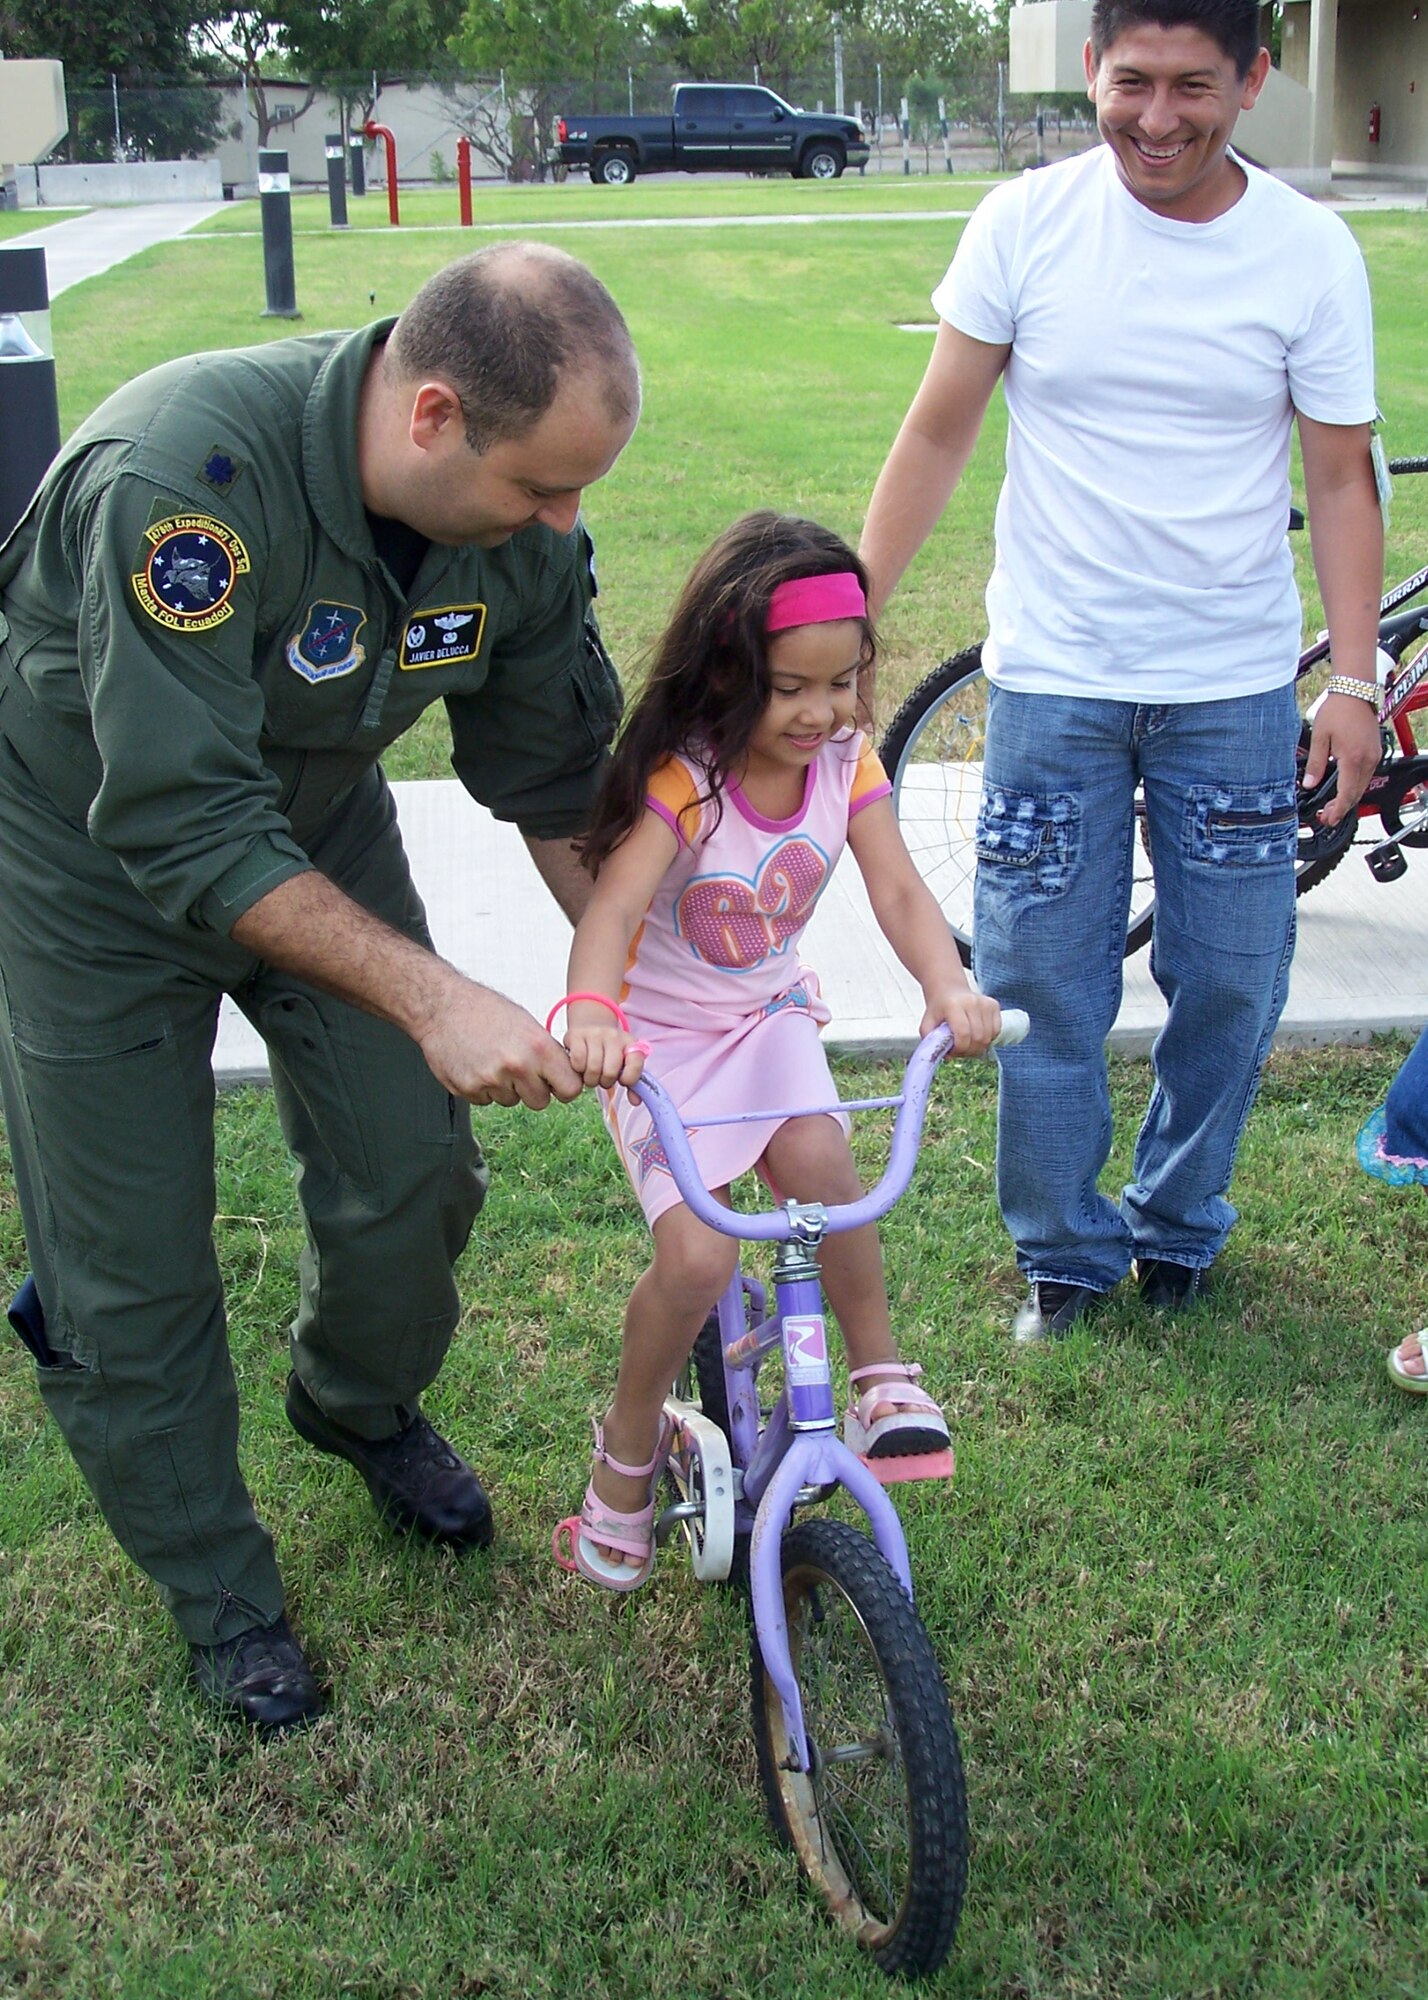 Lt. Col. Javier Delucca helps a girl try out her new bicycle while her father looks on.  (U.S. Air Force official photo)